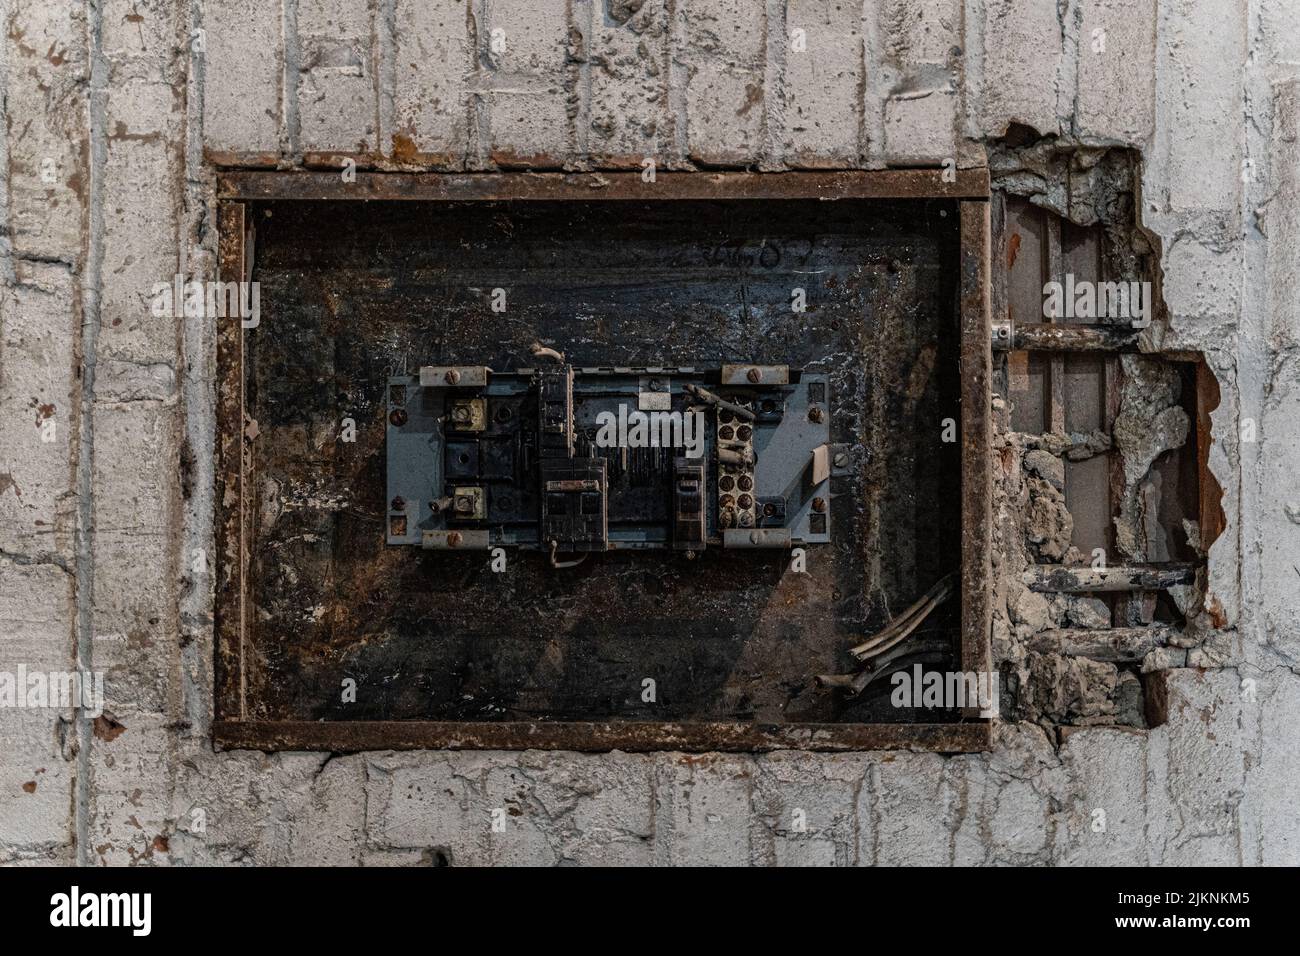 A vintage electrical panel in an abandoned warehouse Stock Photo